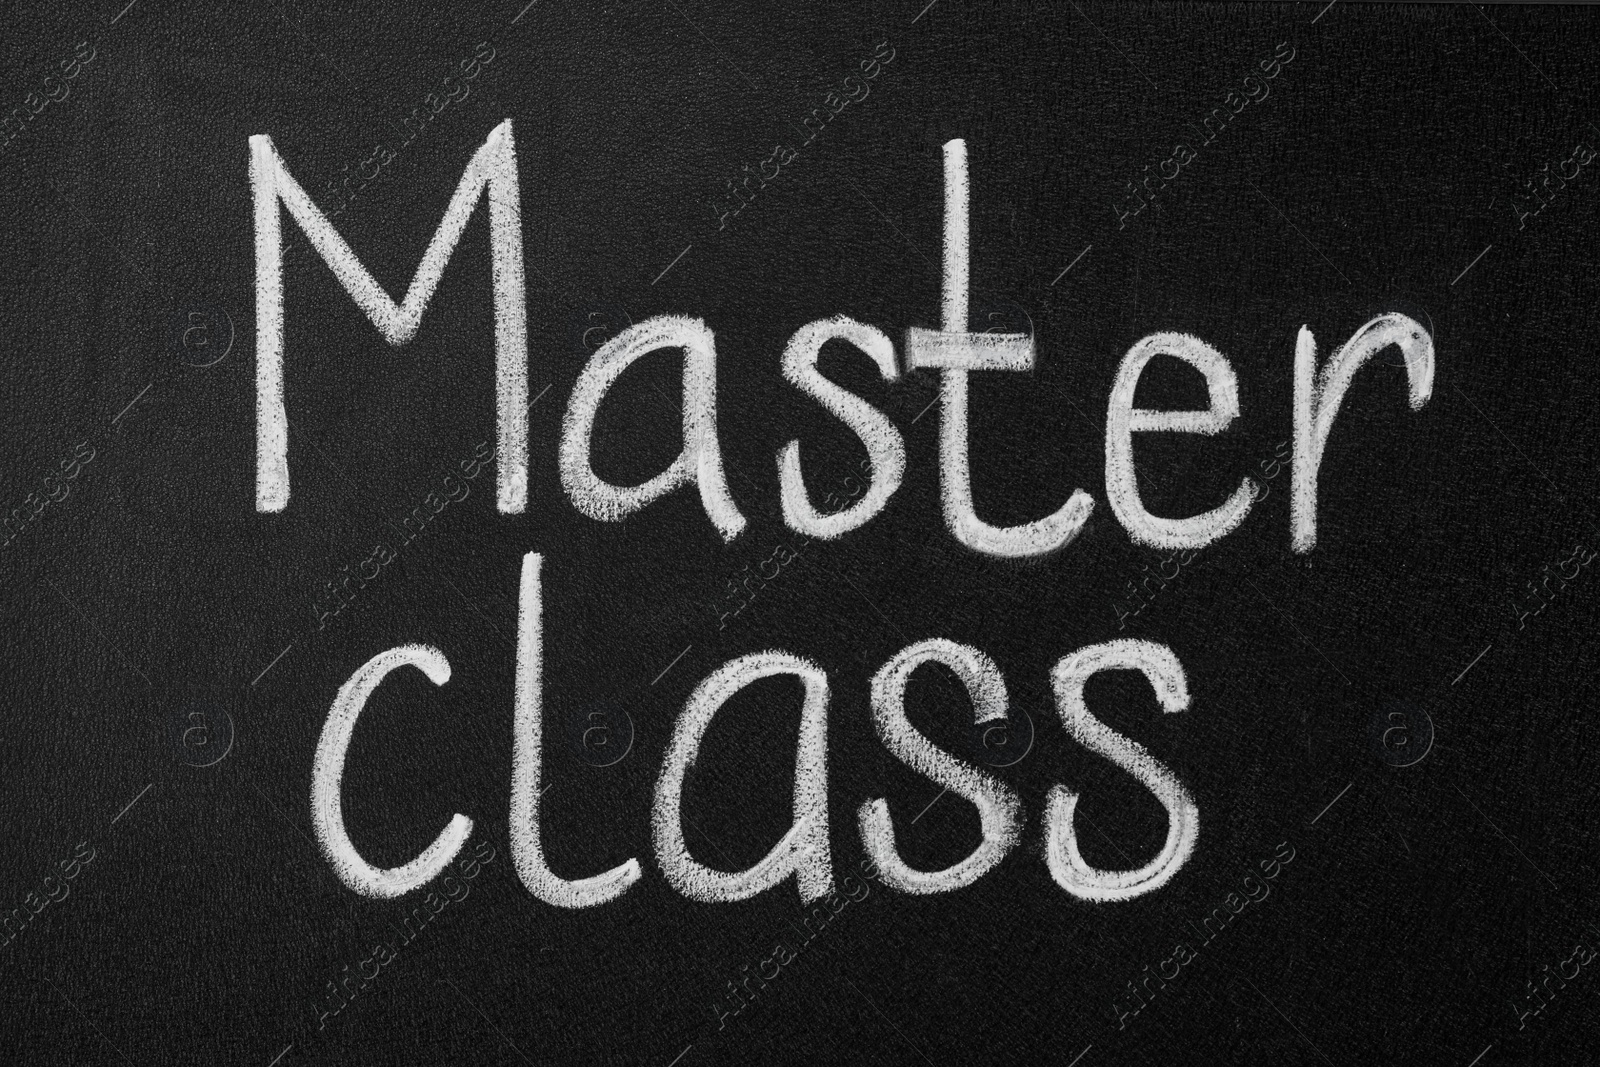 Photo of Words Master Class written with white chalk on blackboard